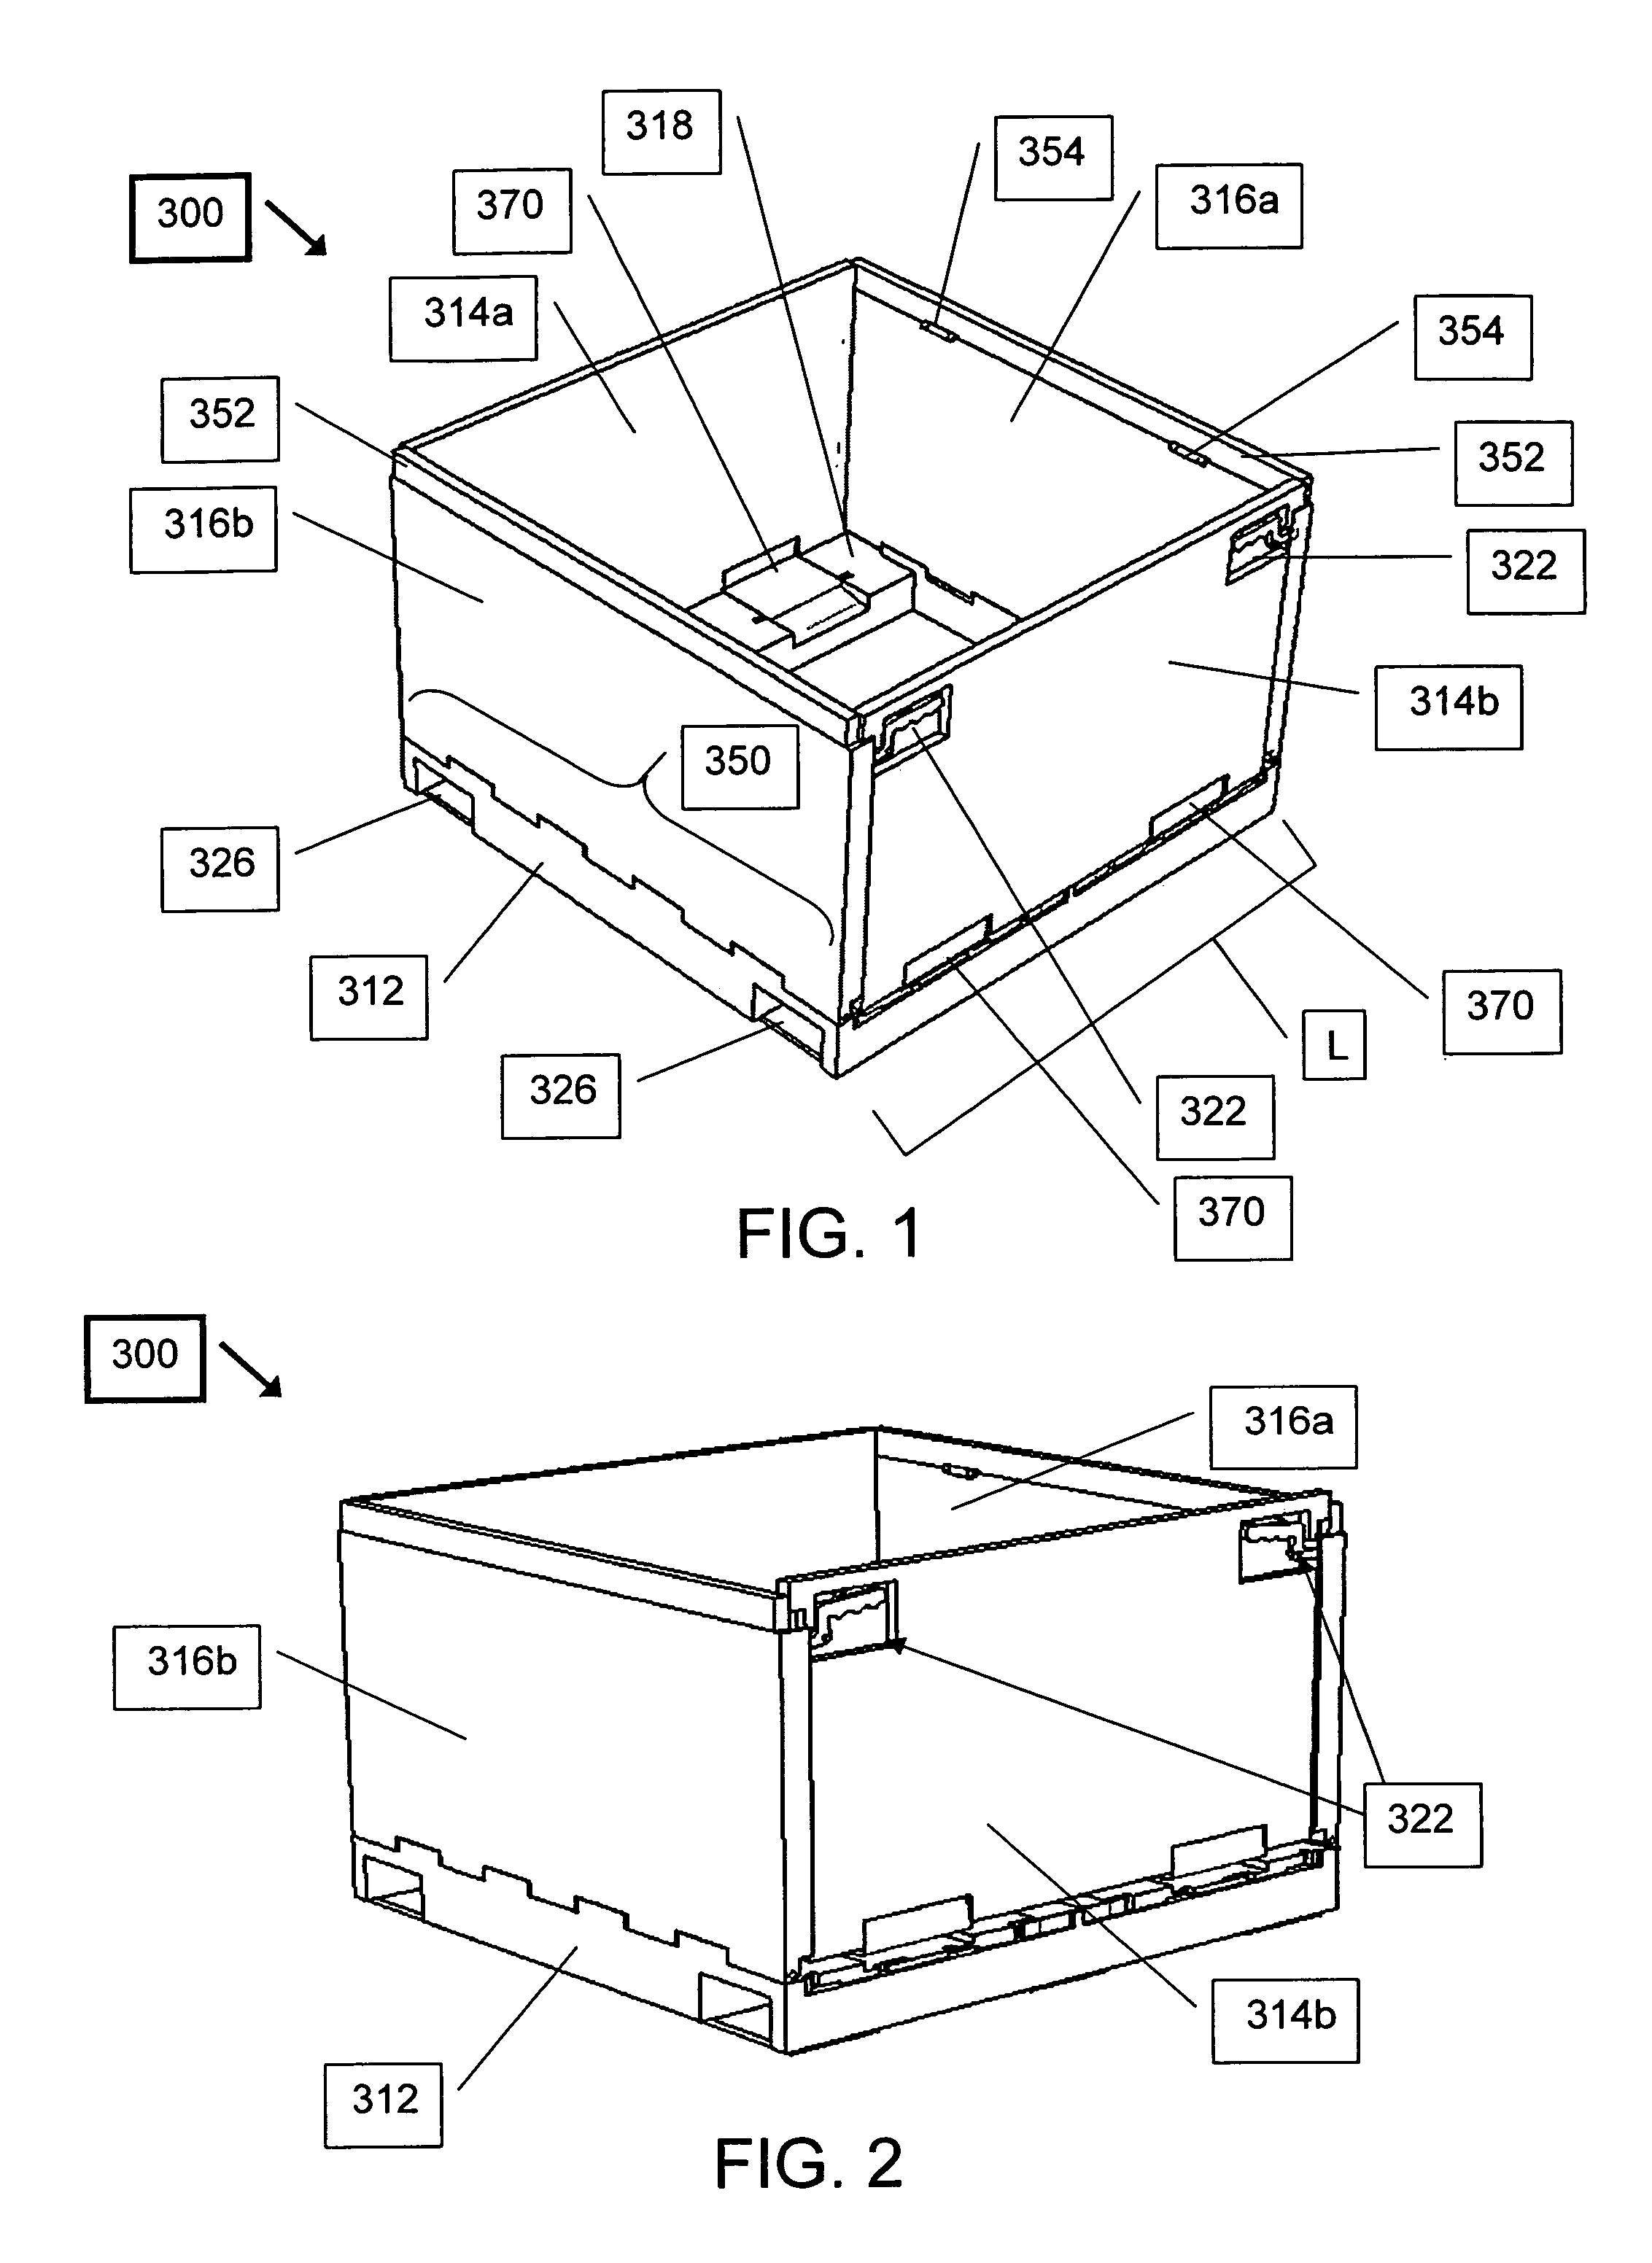 Knock-down crate with walls stored in base and method employing such a crate